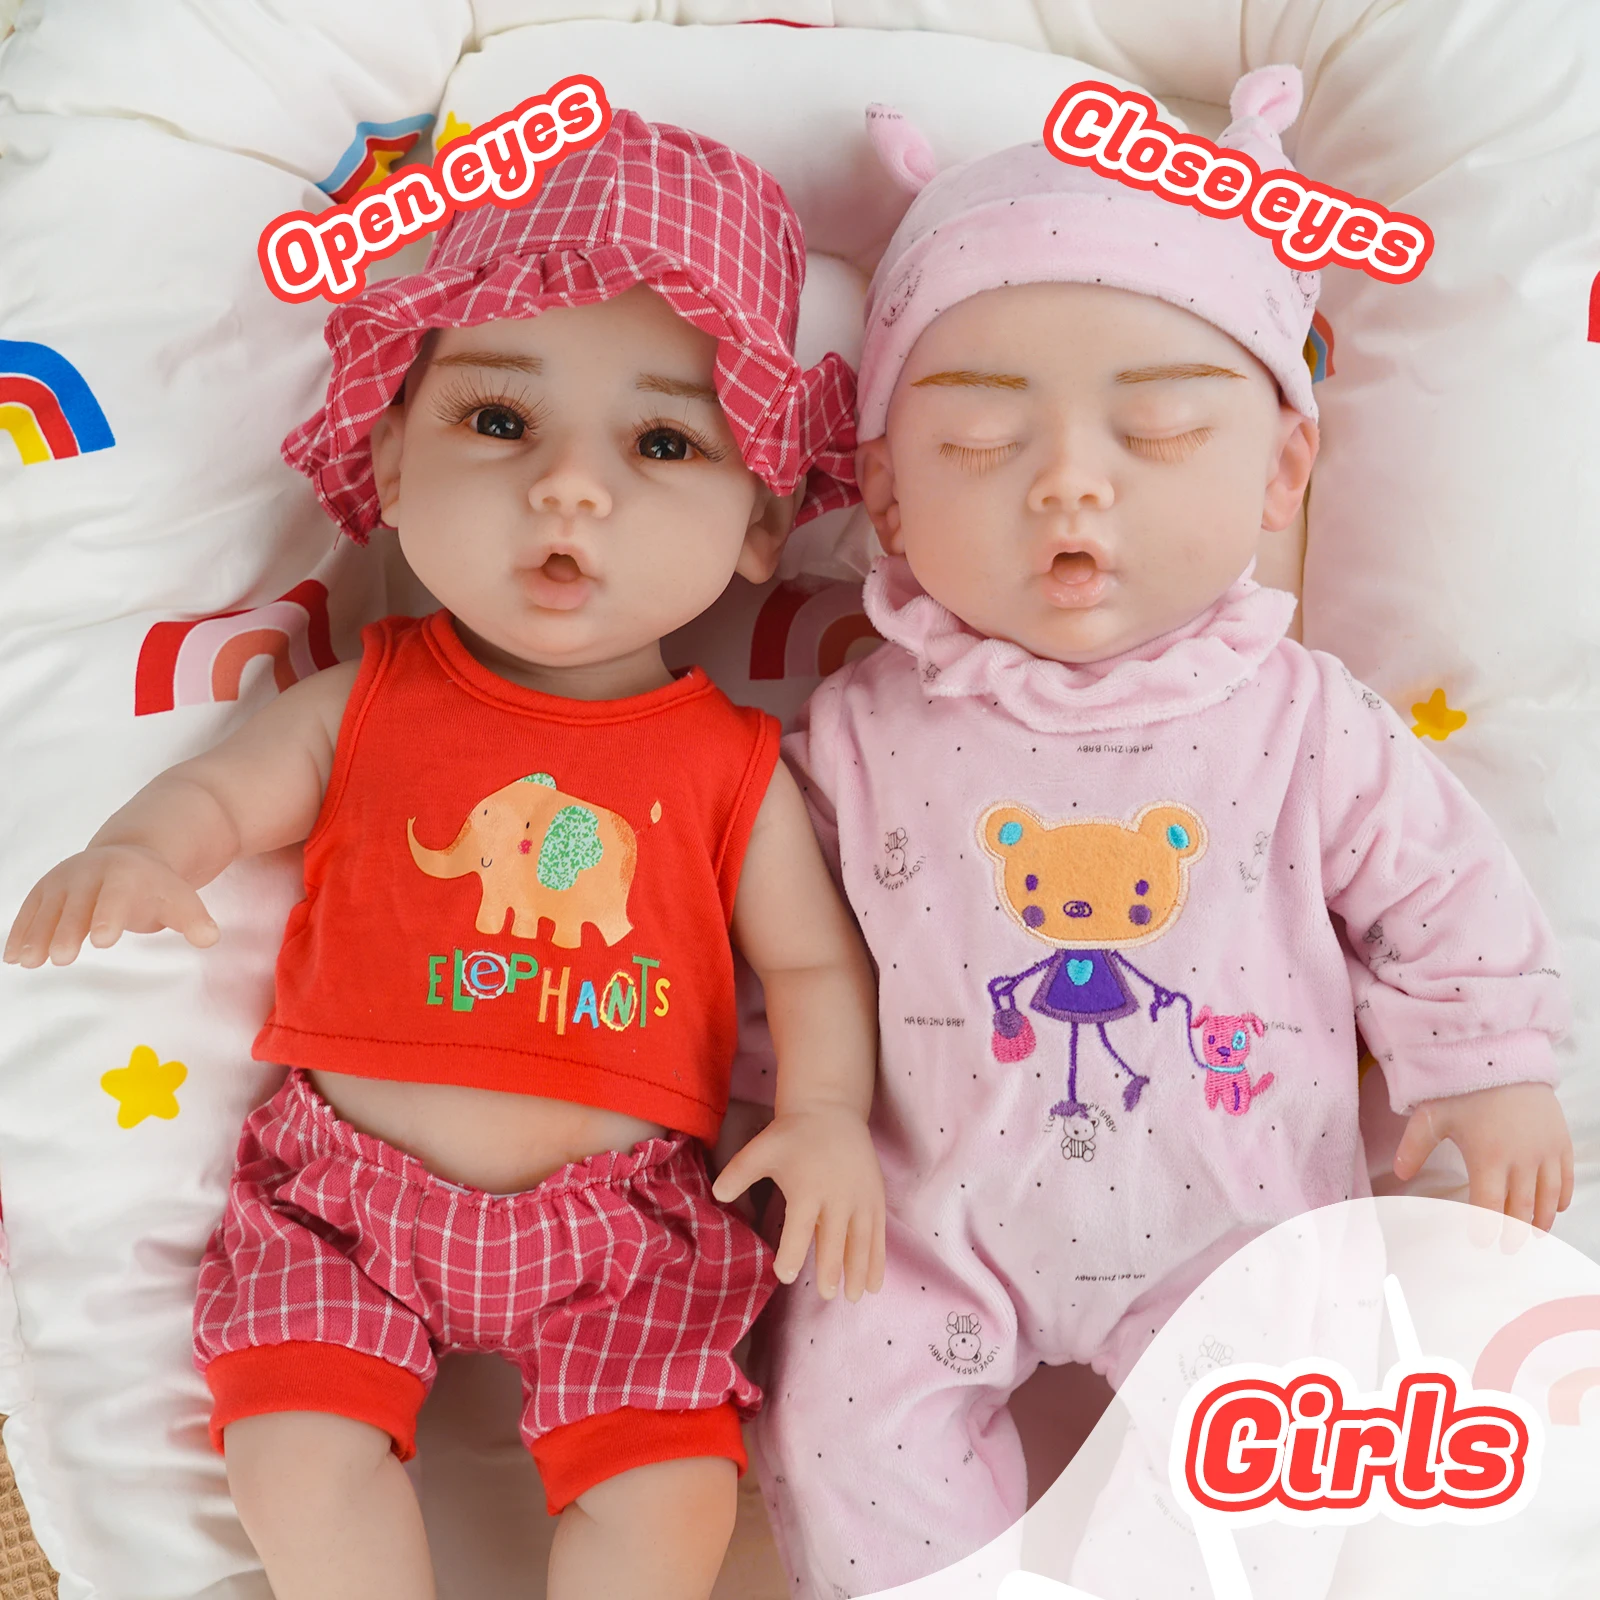 CUAIBB 47cm 2.8kg 100% Full Silicone Baby Doll Children Accompany Toys for Kids Birthday Gift Realistic Infant Care Model